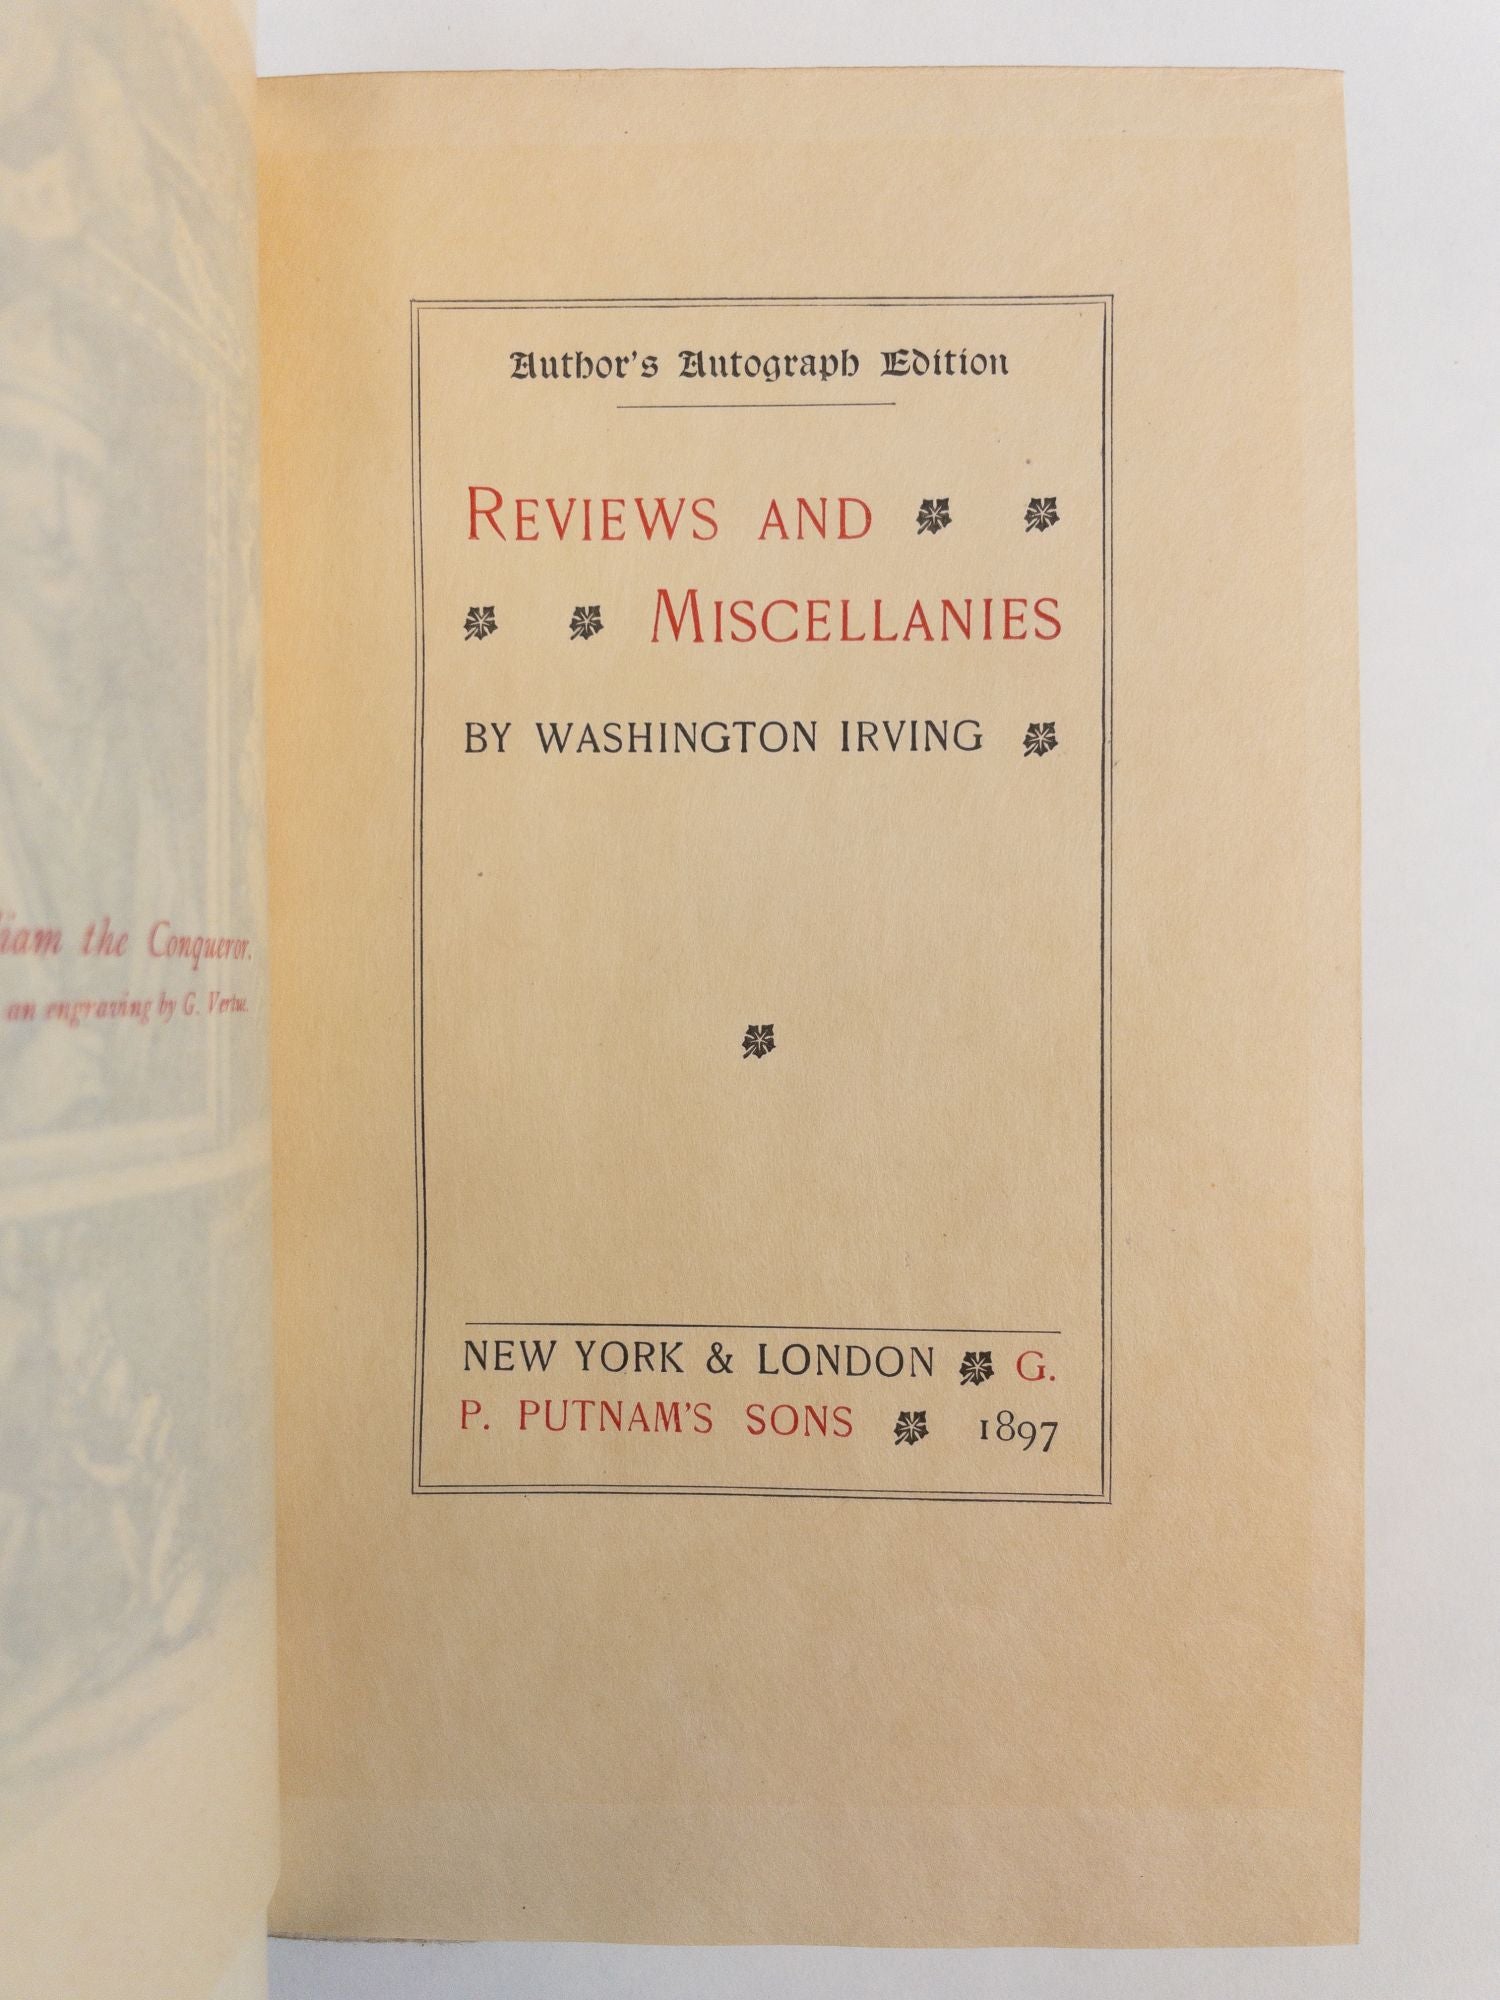 Product Image for THE WORKS OF WASHINGTON IRVING [The Author's Autograph Edition] [Forty Volumes]